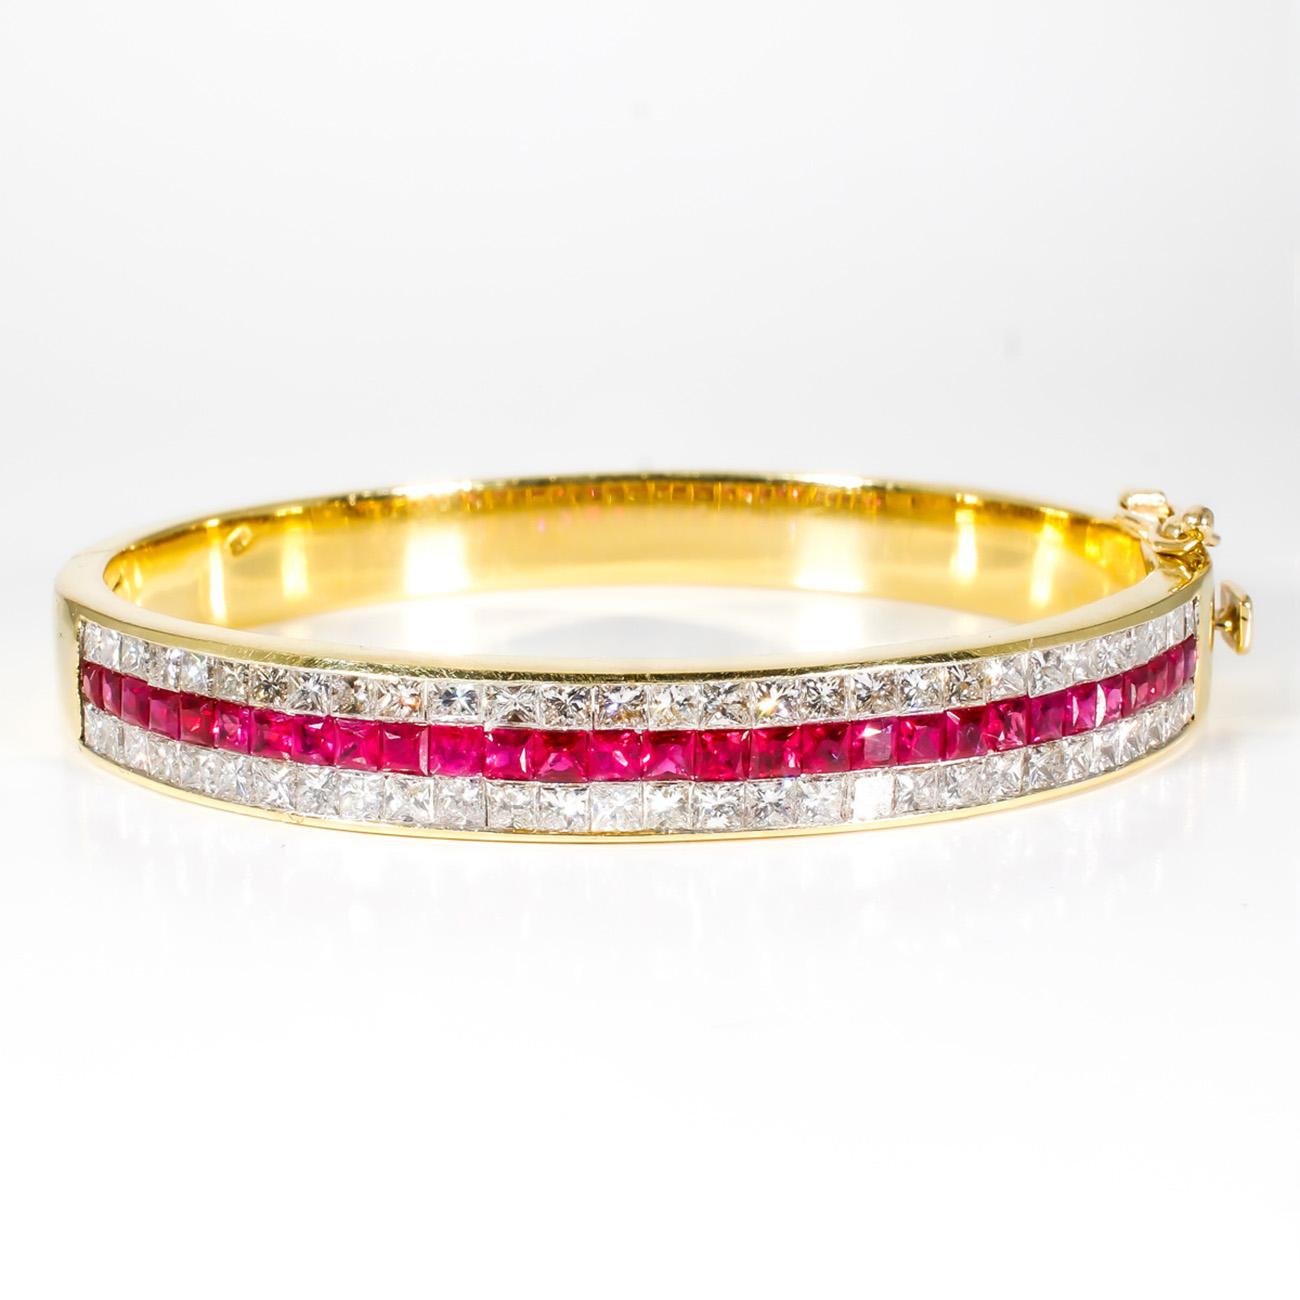 Bangle in 18K yellow gold with 3-row invisible set combination princess cut diamonds and rubies.  D4.02ct.t.w.  Rubies 2.76ct.t.w.